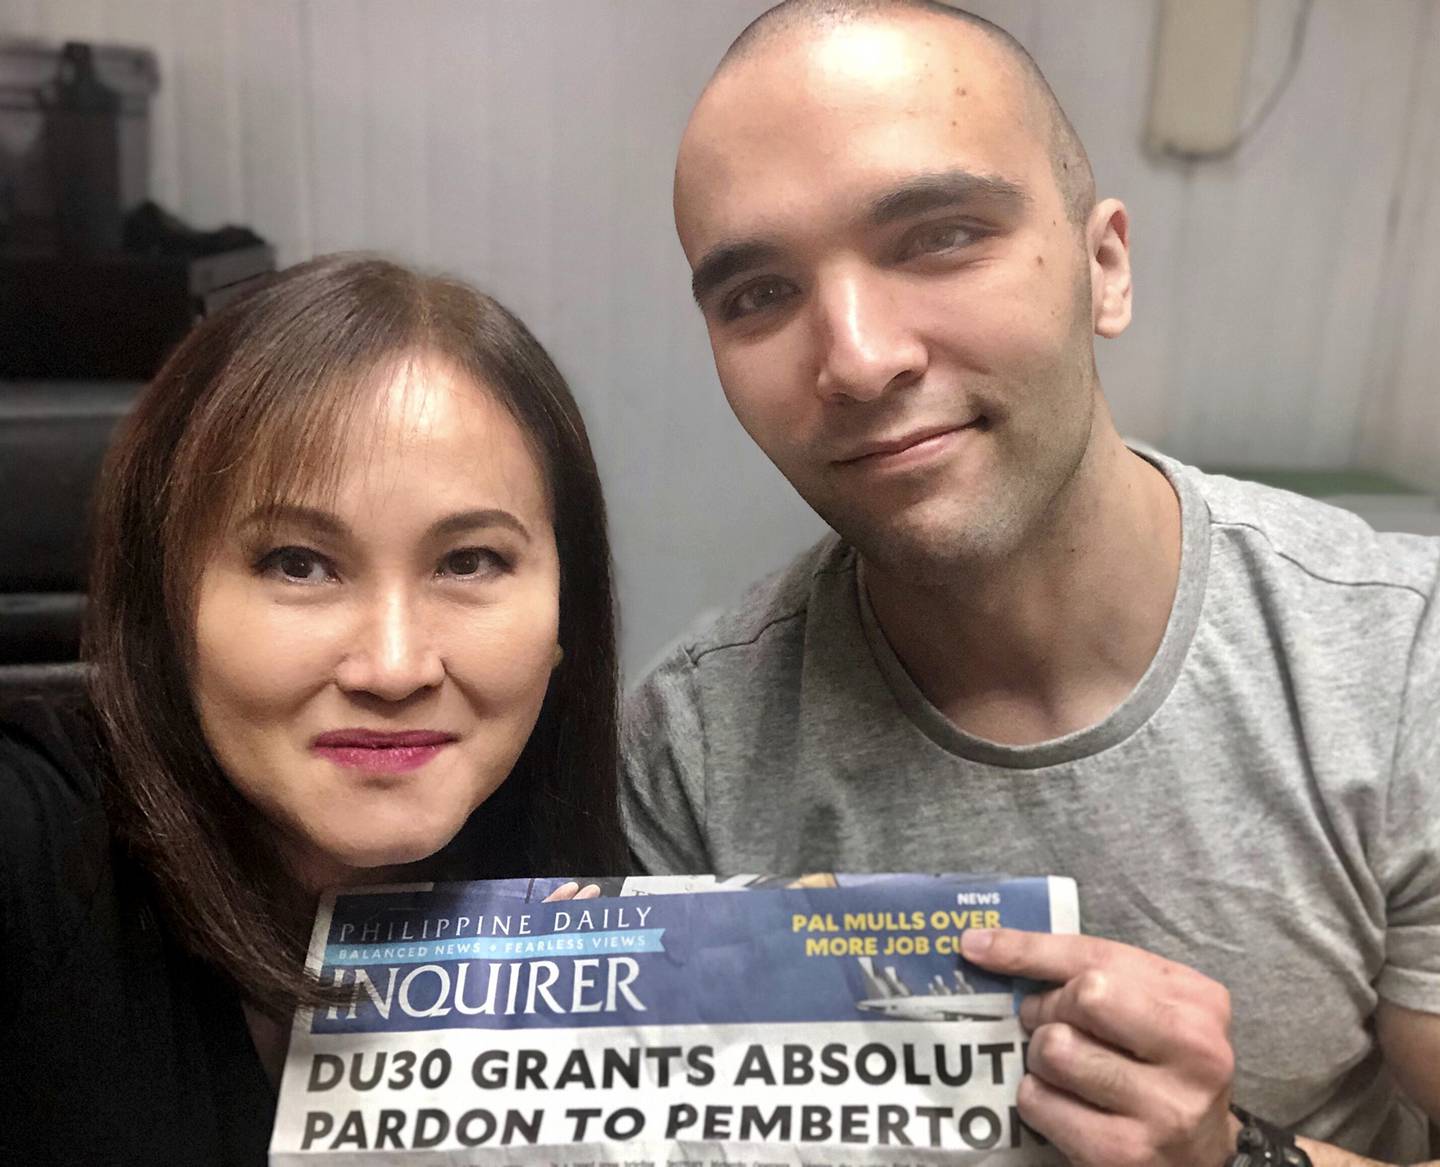 U.S. Marine Lance Cpl. Joseph Scott Pemberton, right, poses for a selfie while showing the headlines of a newspaper beside his lawyer Rowena Garcia-Flores on Tuesday Sept. 8, 2020, in Camp Aguinaldo, Quezon city, Philippines